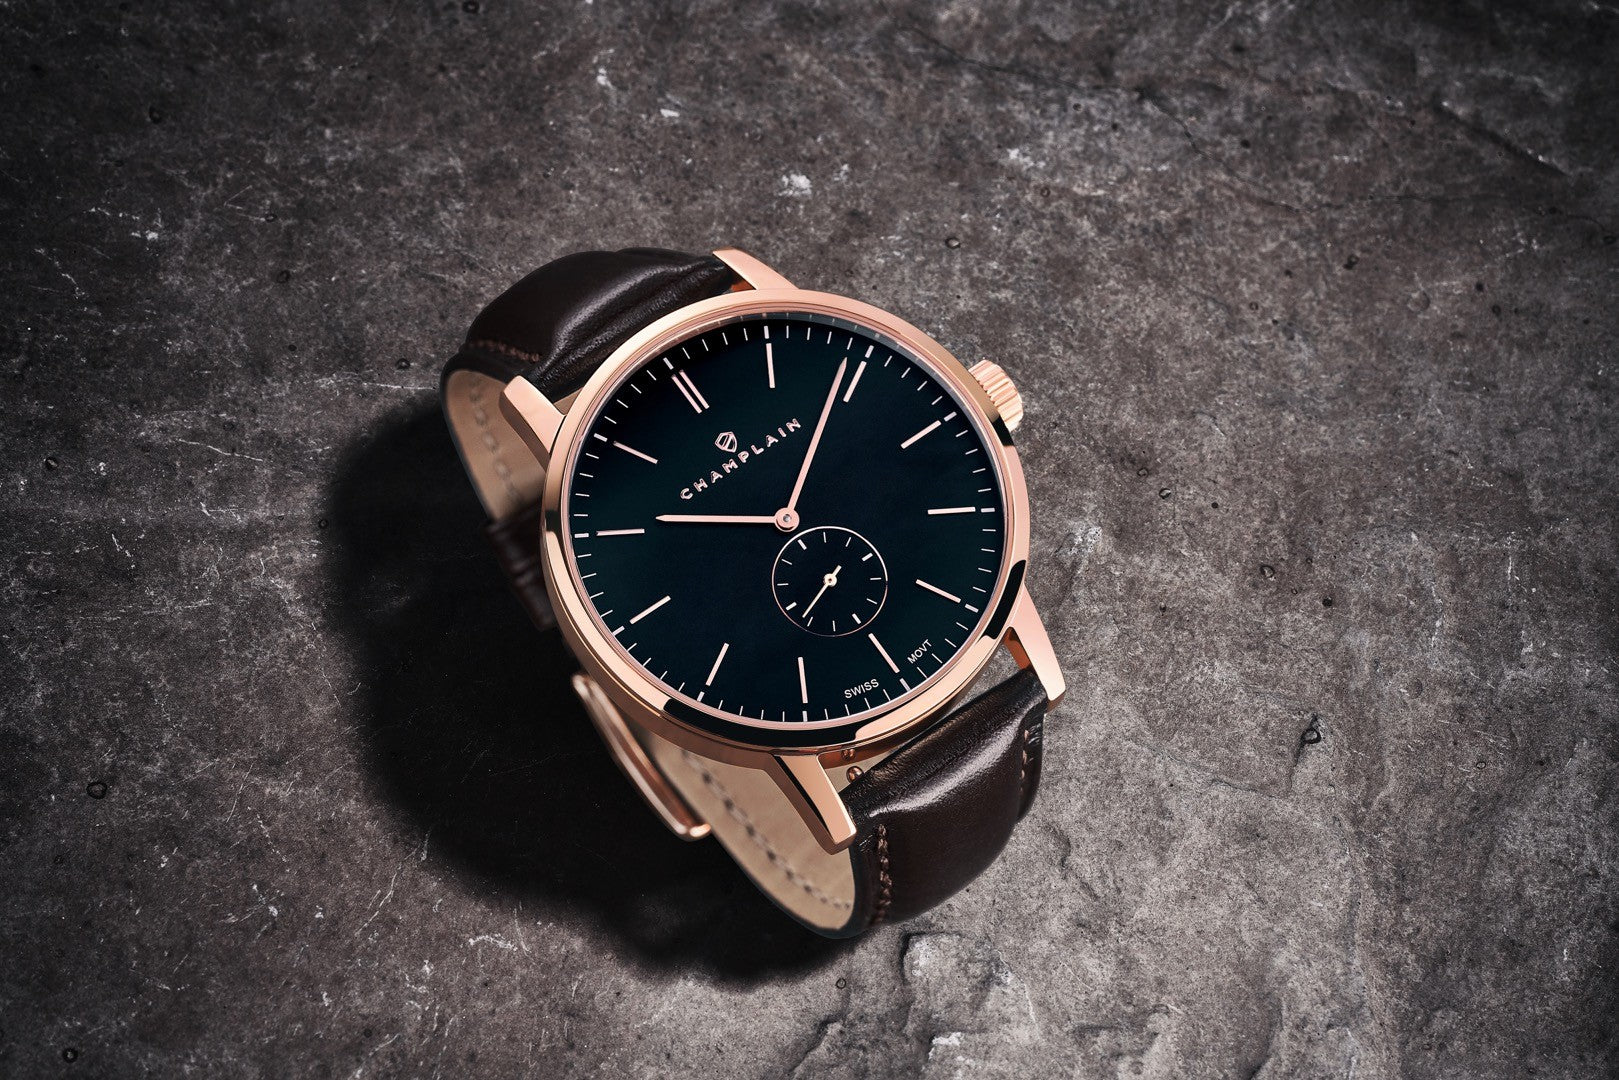 Champlain watch The Governor in a Rose Gold case, black dial with a brown leather strap.